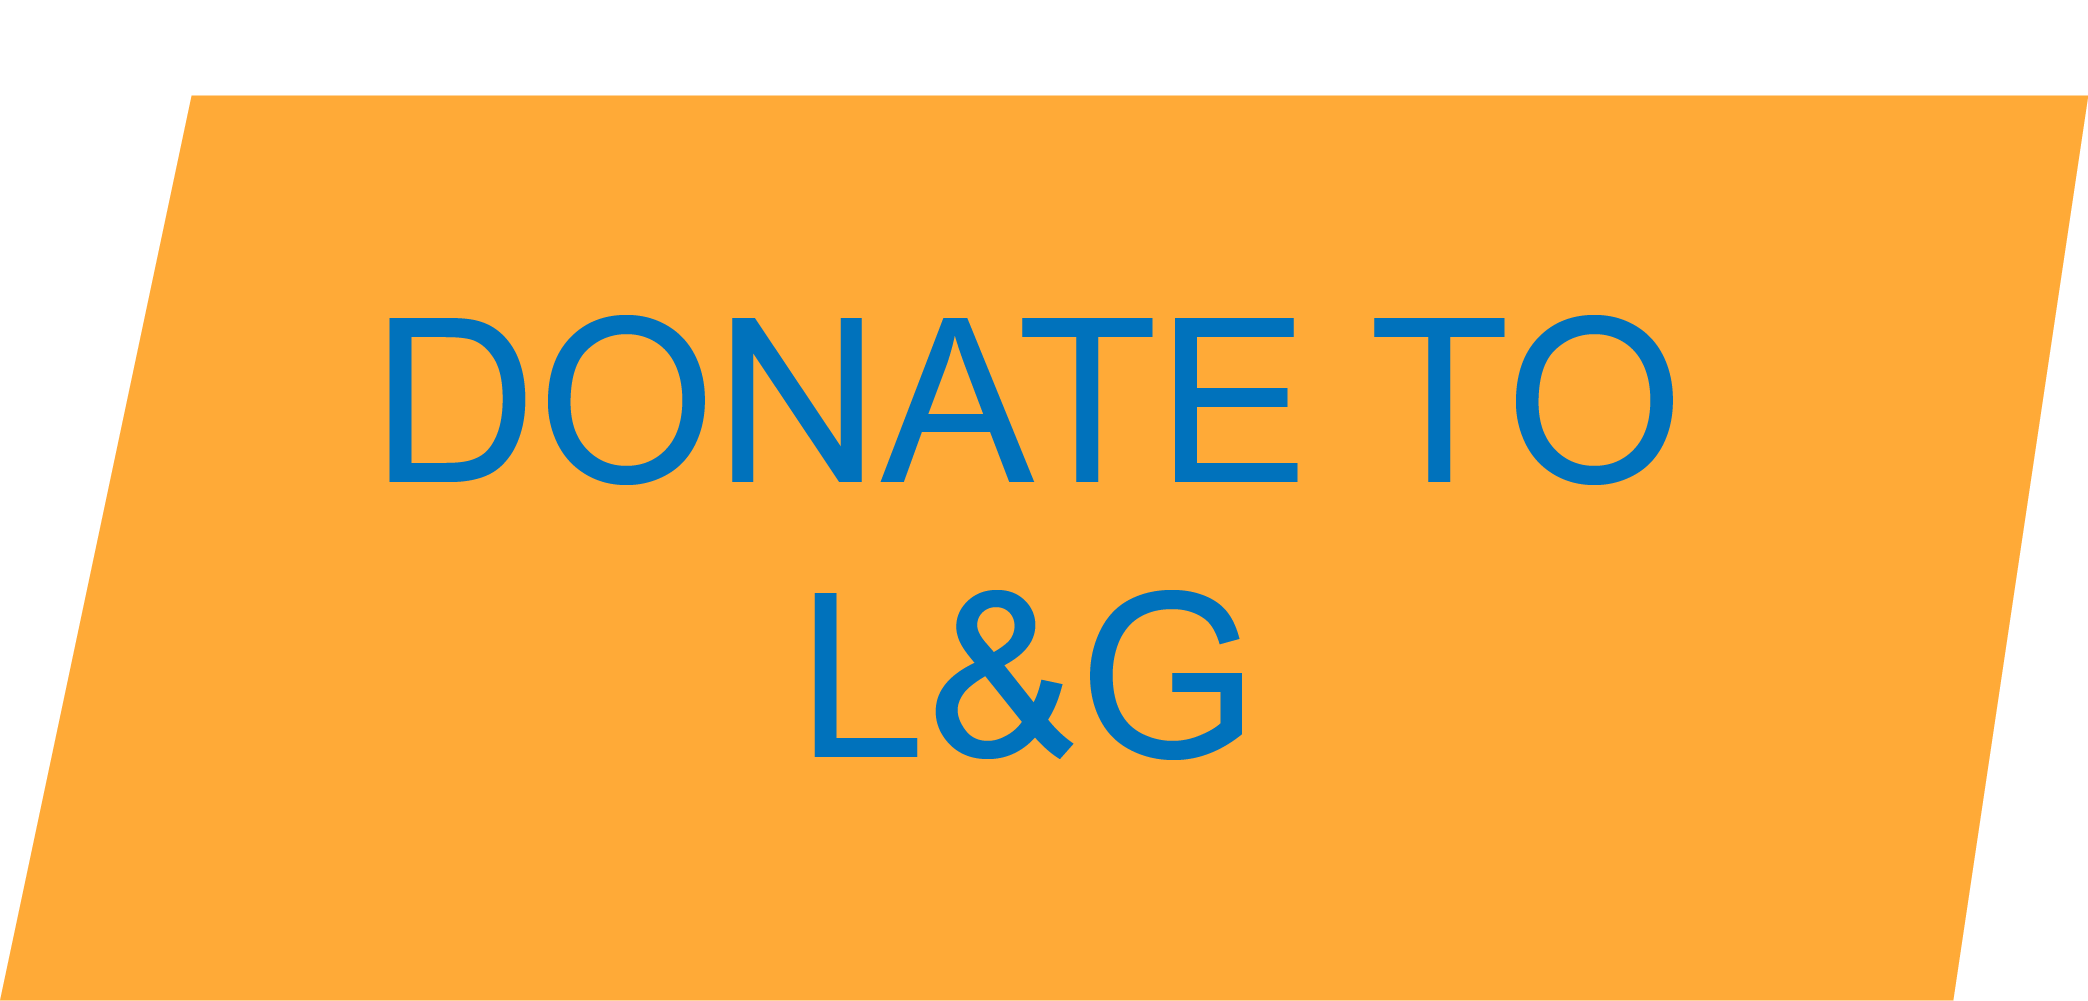 icon that reads Donate to L&G